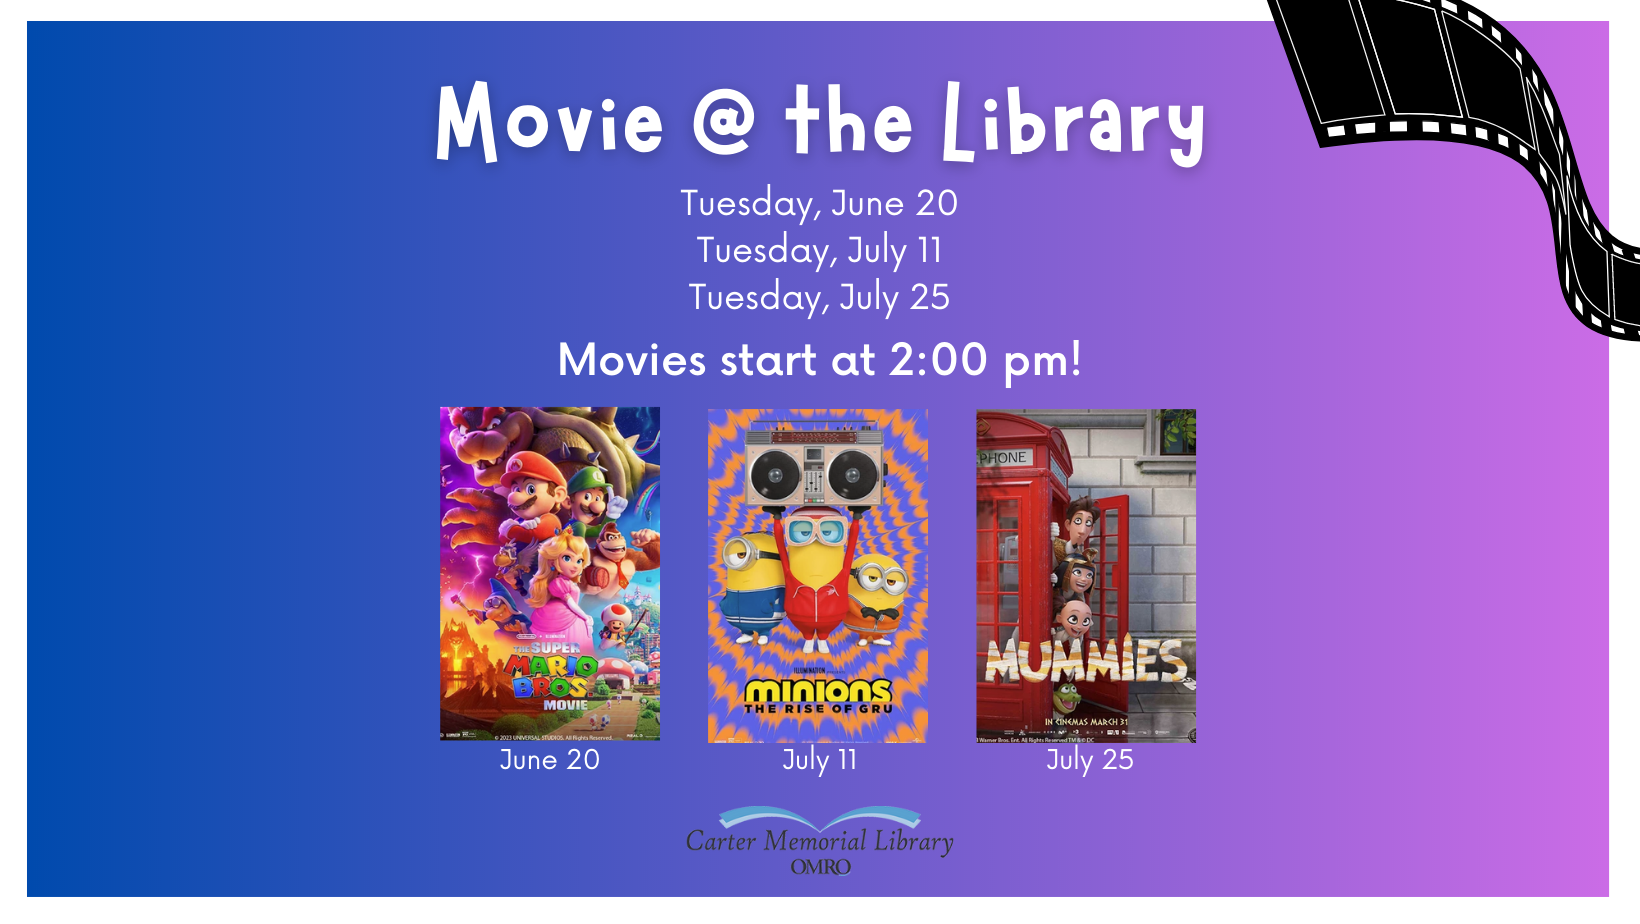 Movies @ the Library